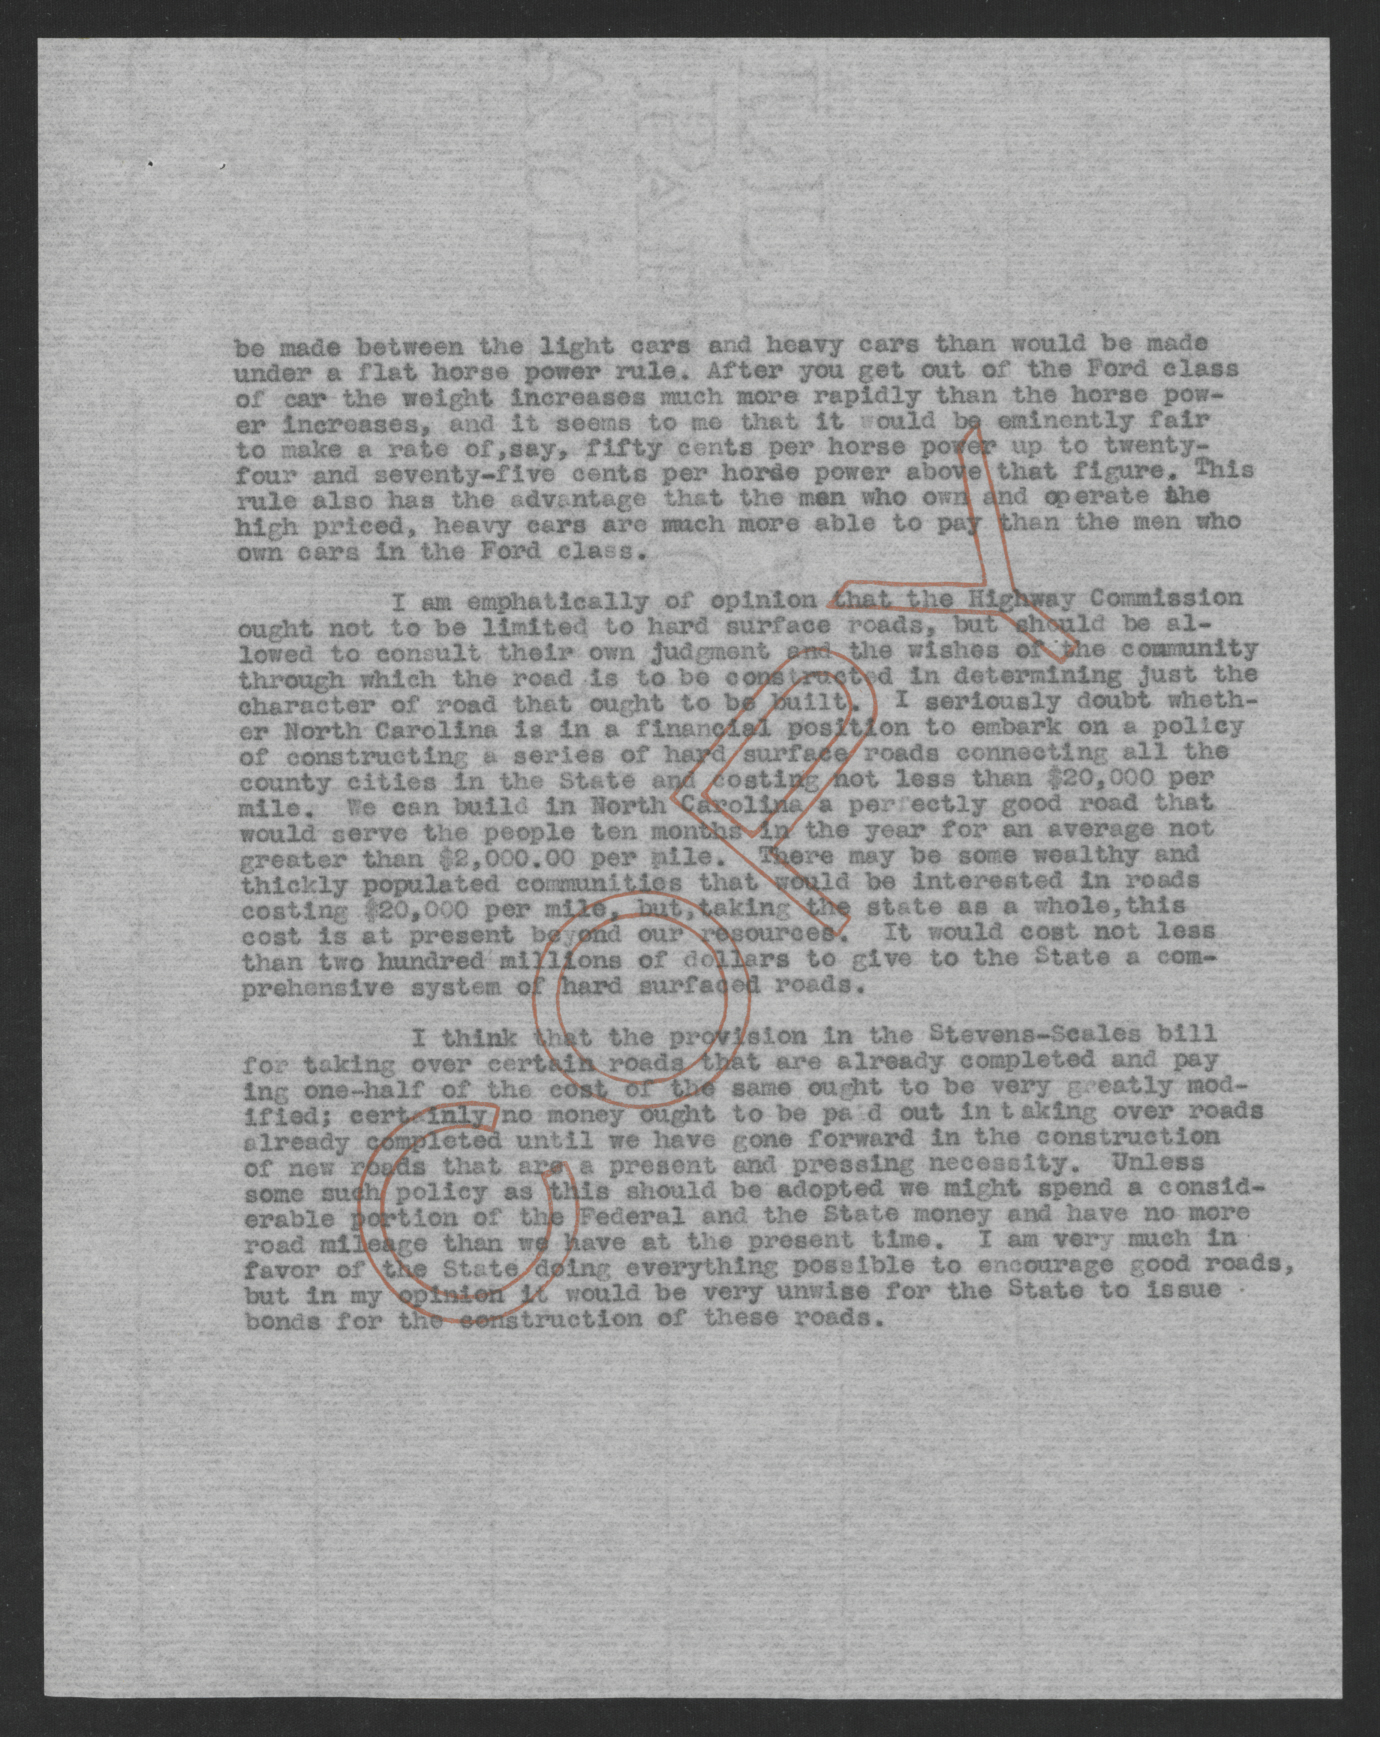 Letter from Thomas W. Bickett to Miles W. Ferebee, February 8, 1919, page 2